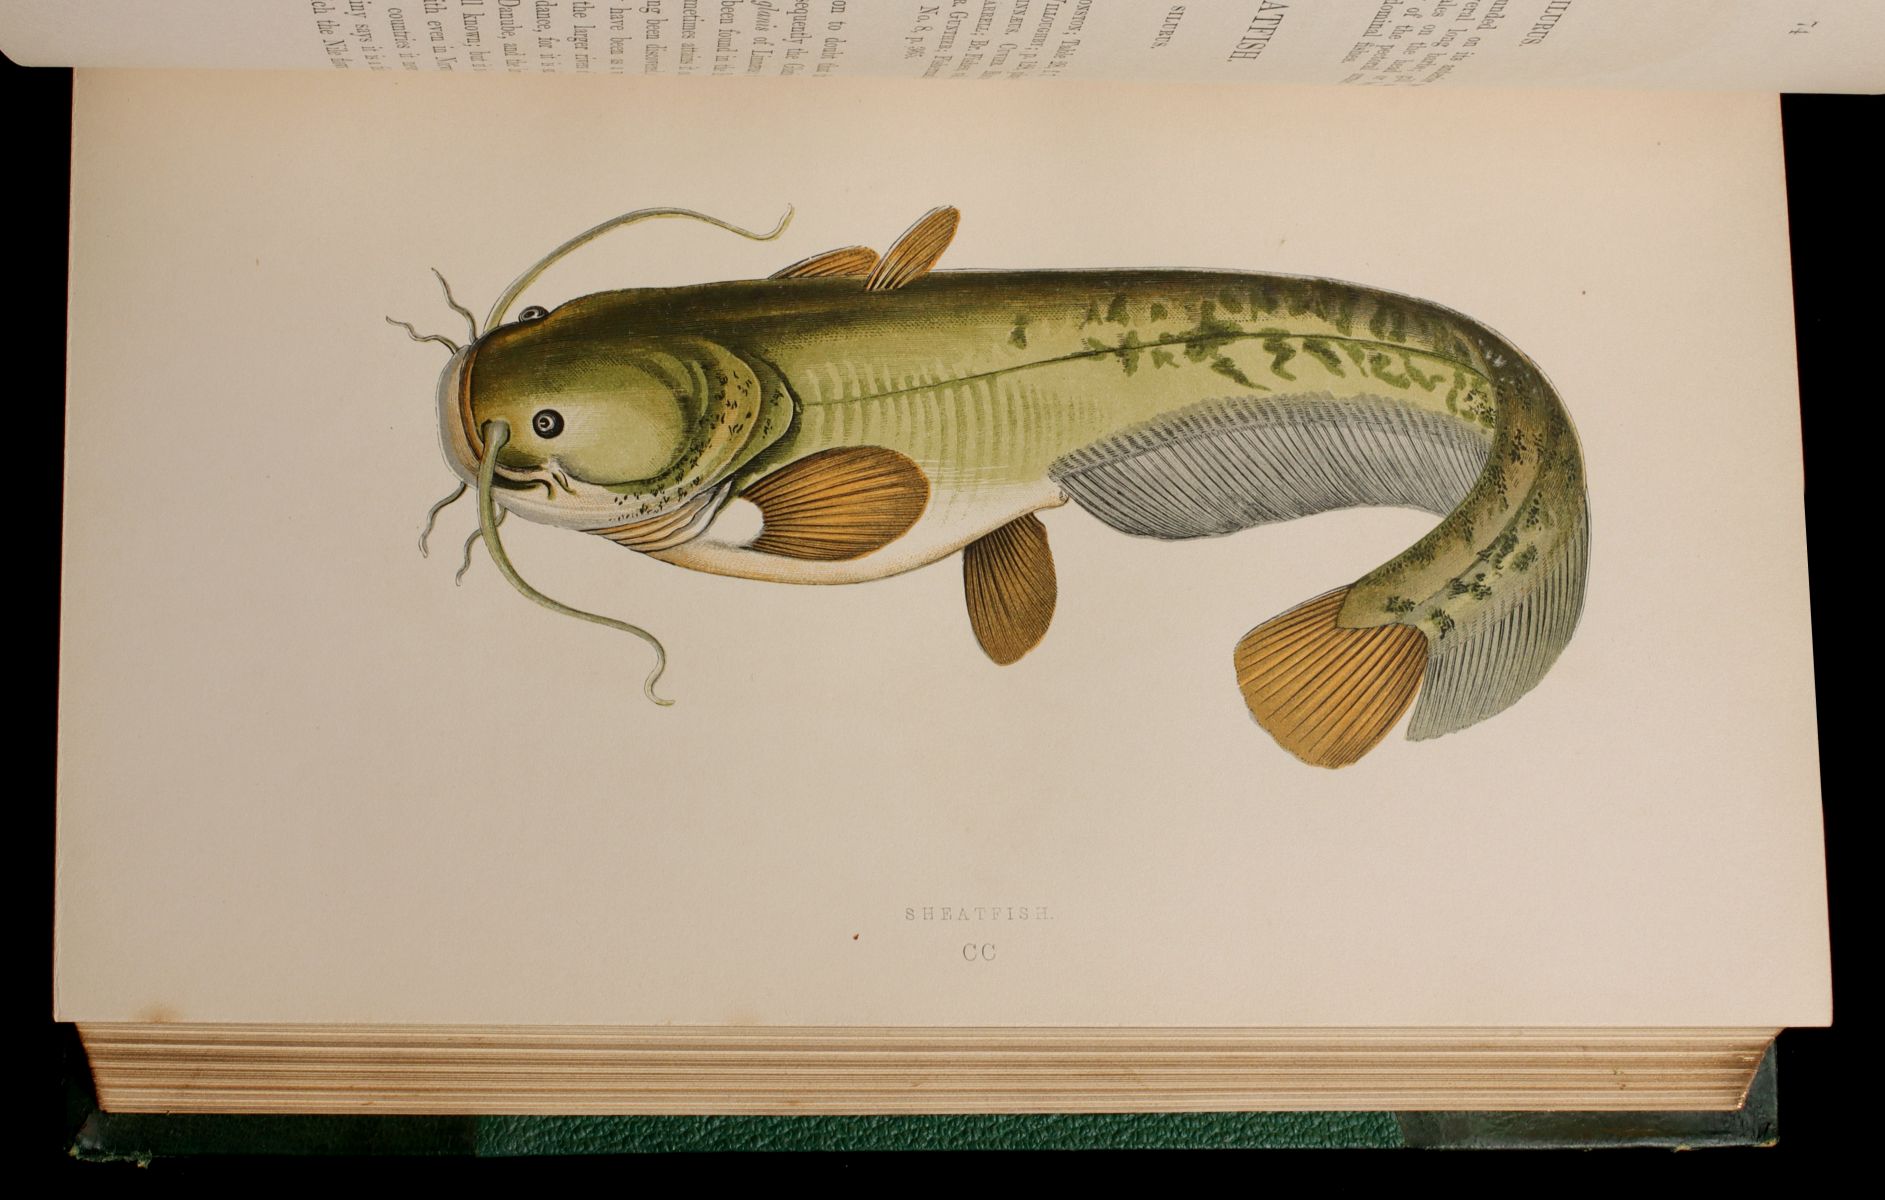 COUCH, JONATHAN. A HISTORY OF FISHES...BRITISH ISLES